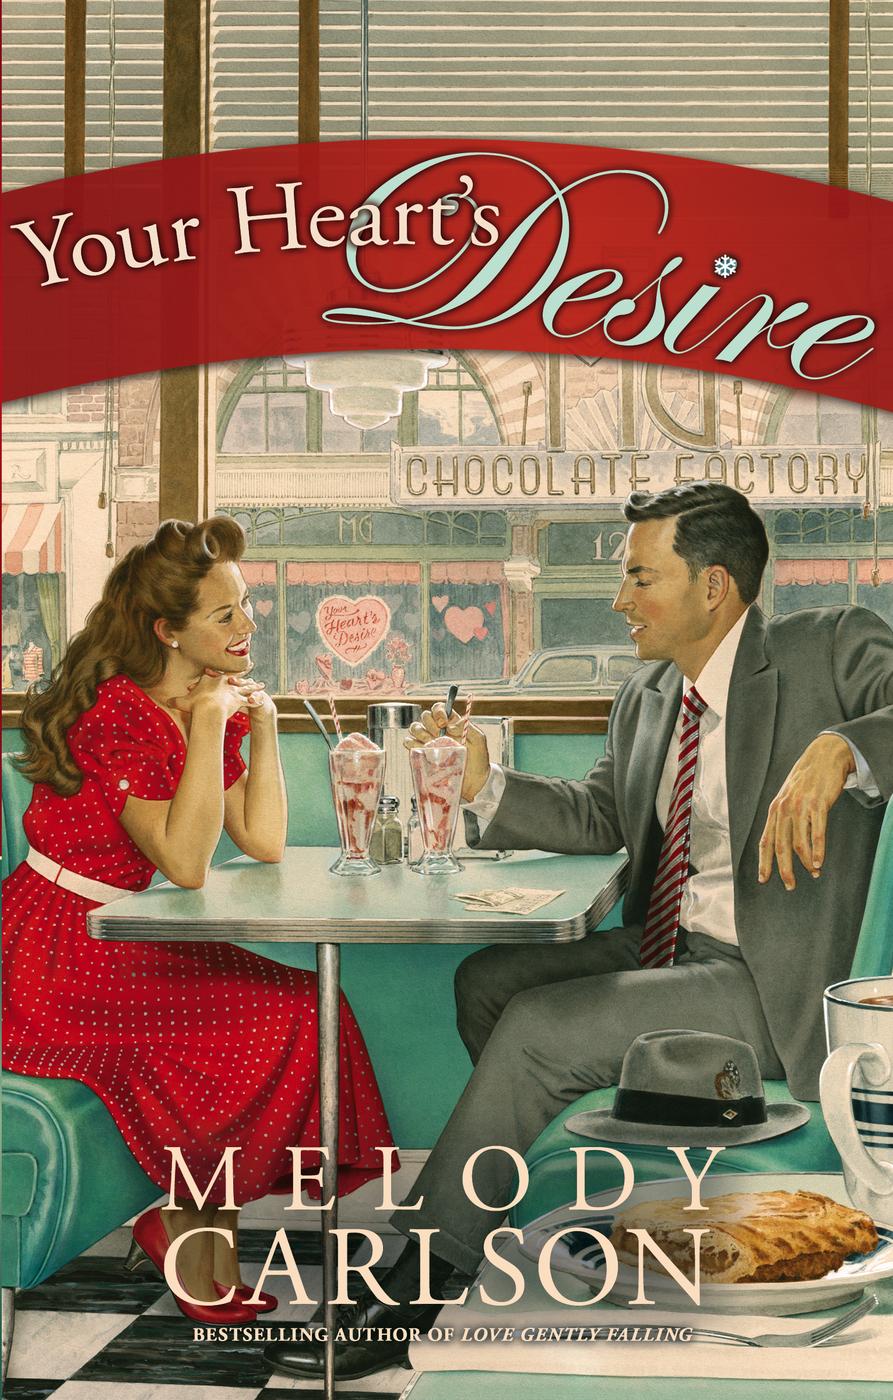 Your Heart's Desire (2016) by Melody Carlson